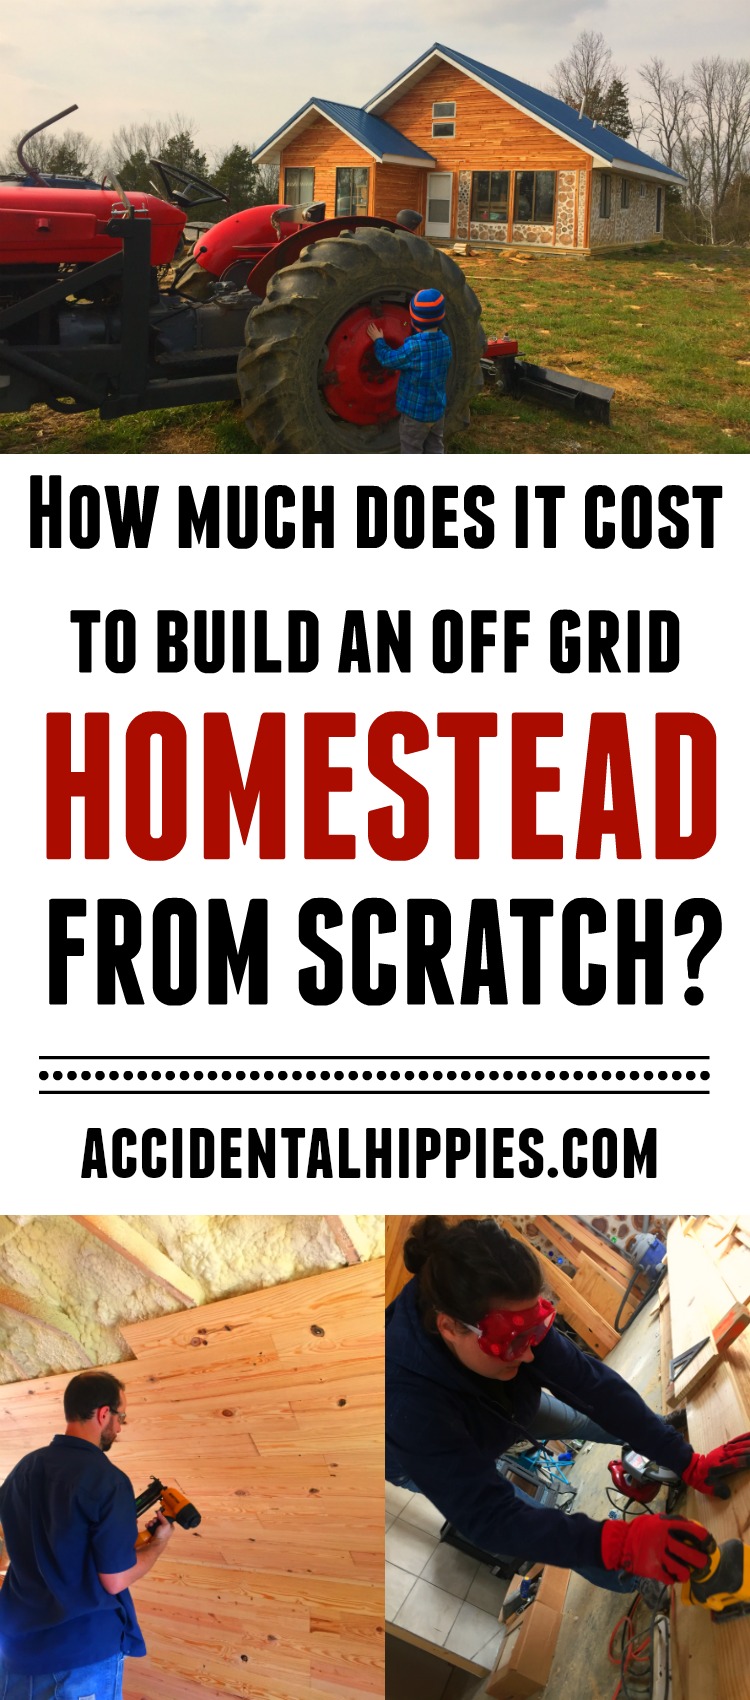 Get a better idea of what it really costs to build a homestead from scratch. Check out our cordwood house and learn the true cost to build from start to finish.